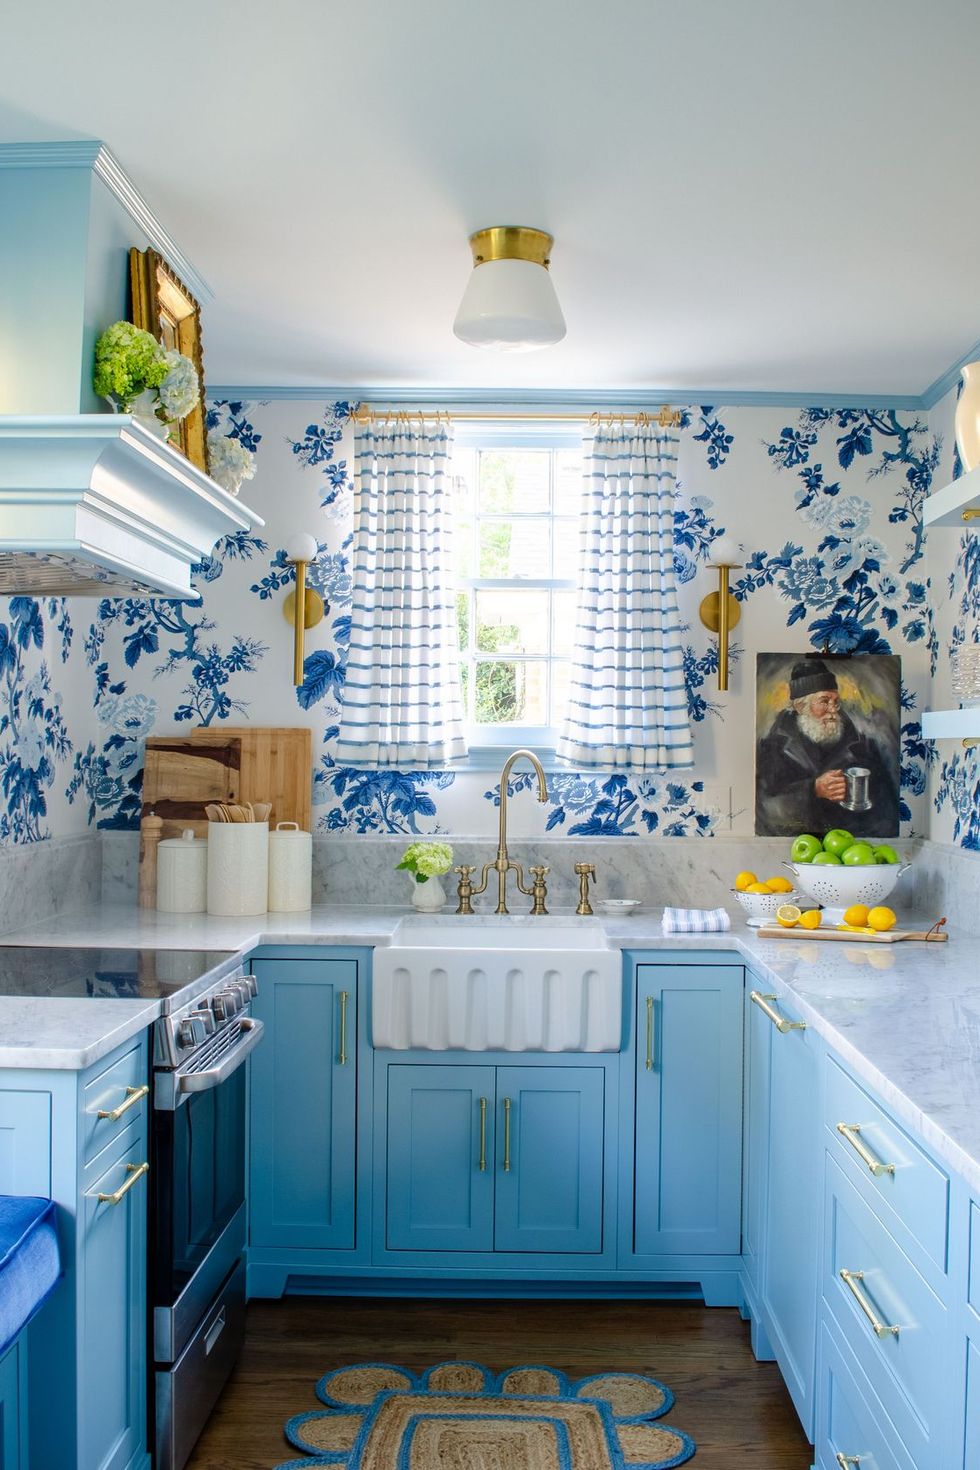 Do you know about theme-based kitchens: popular kitchen themes?